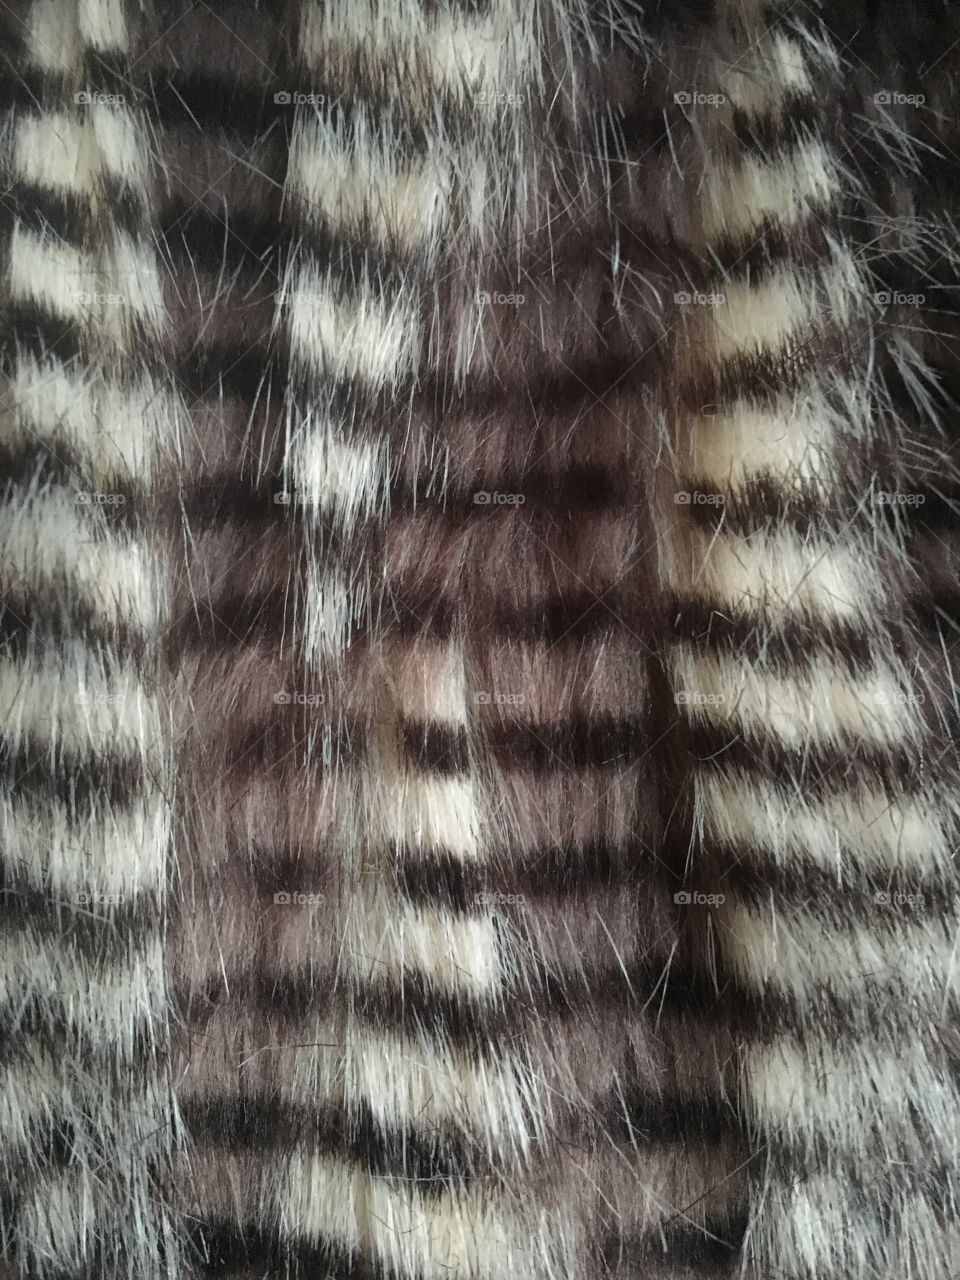 Feather texture. 